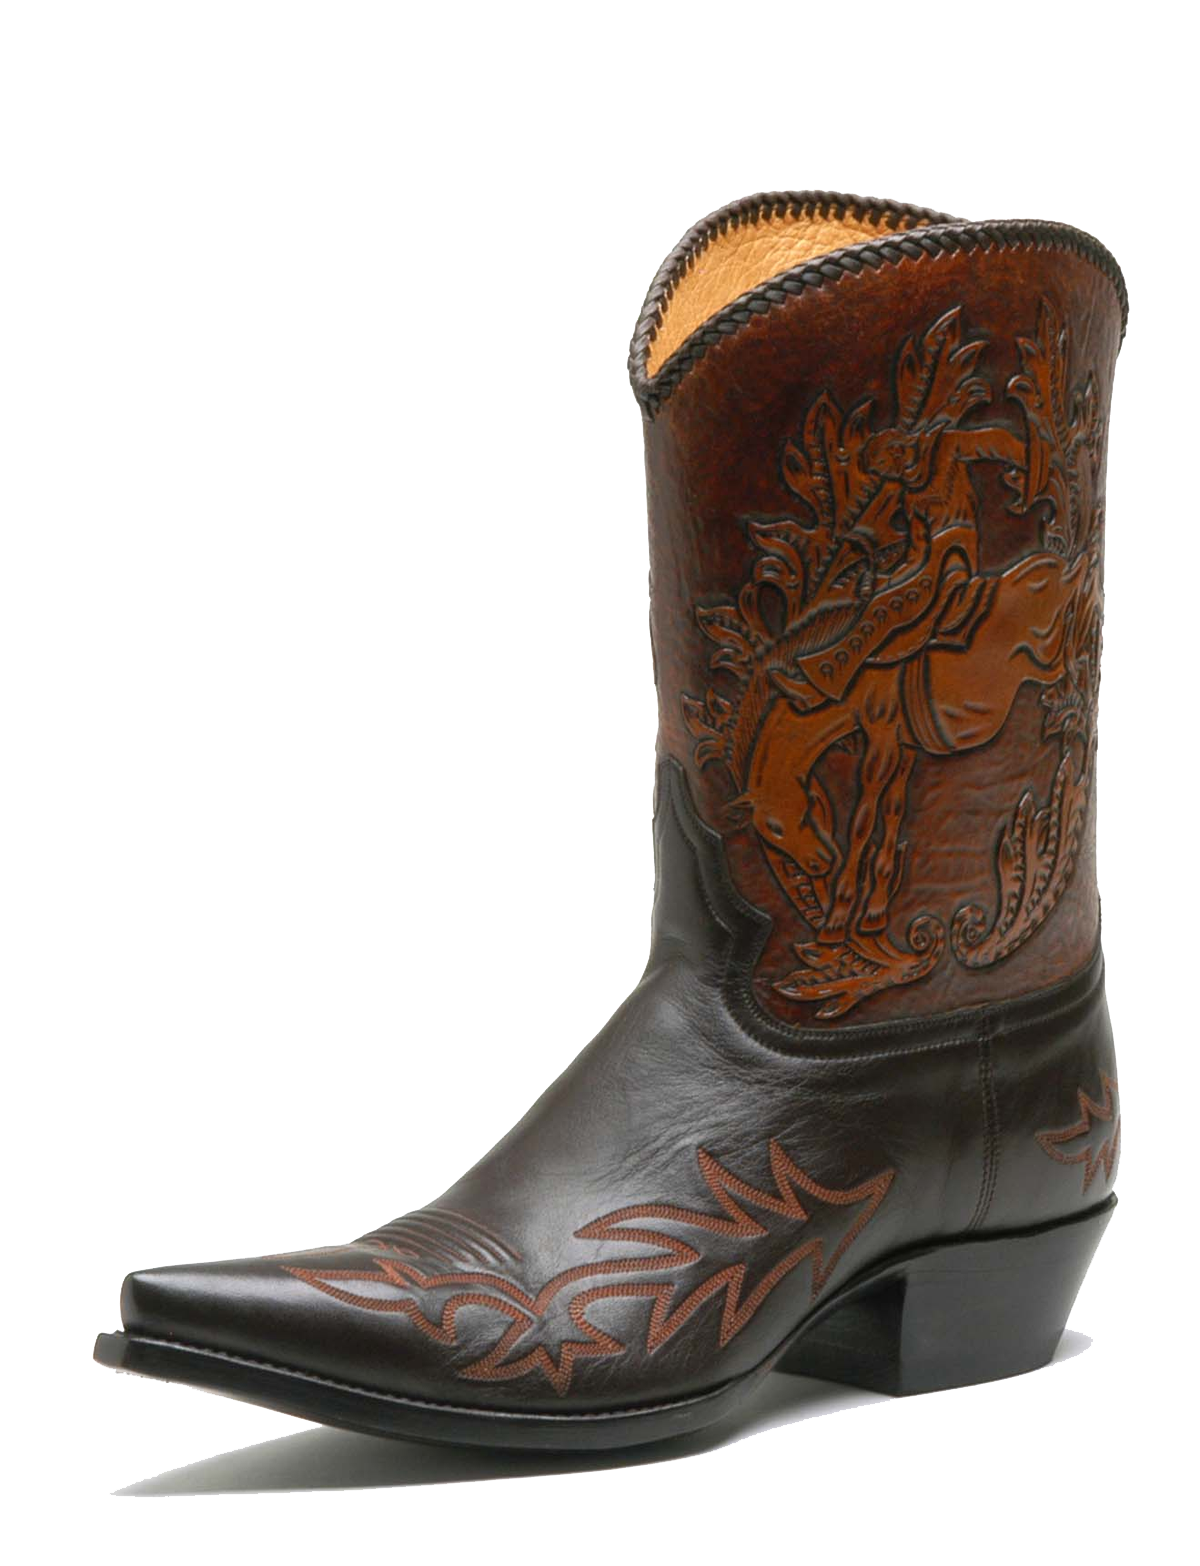 Boot File PNG Image